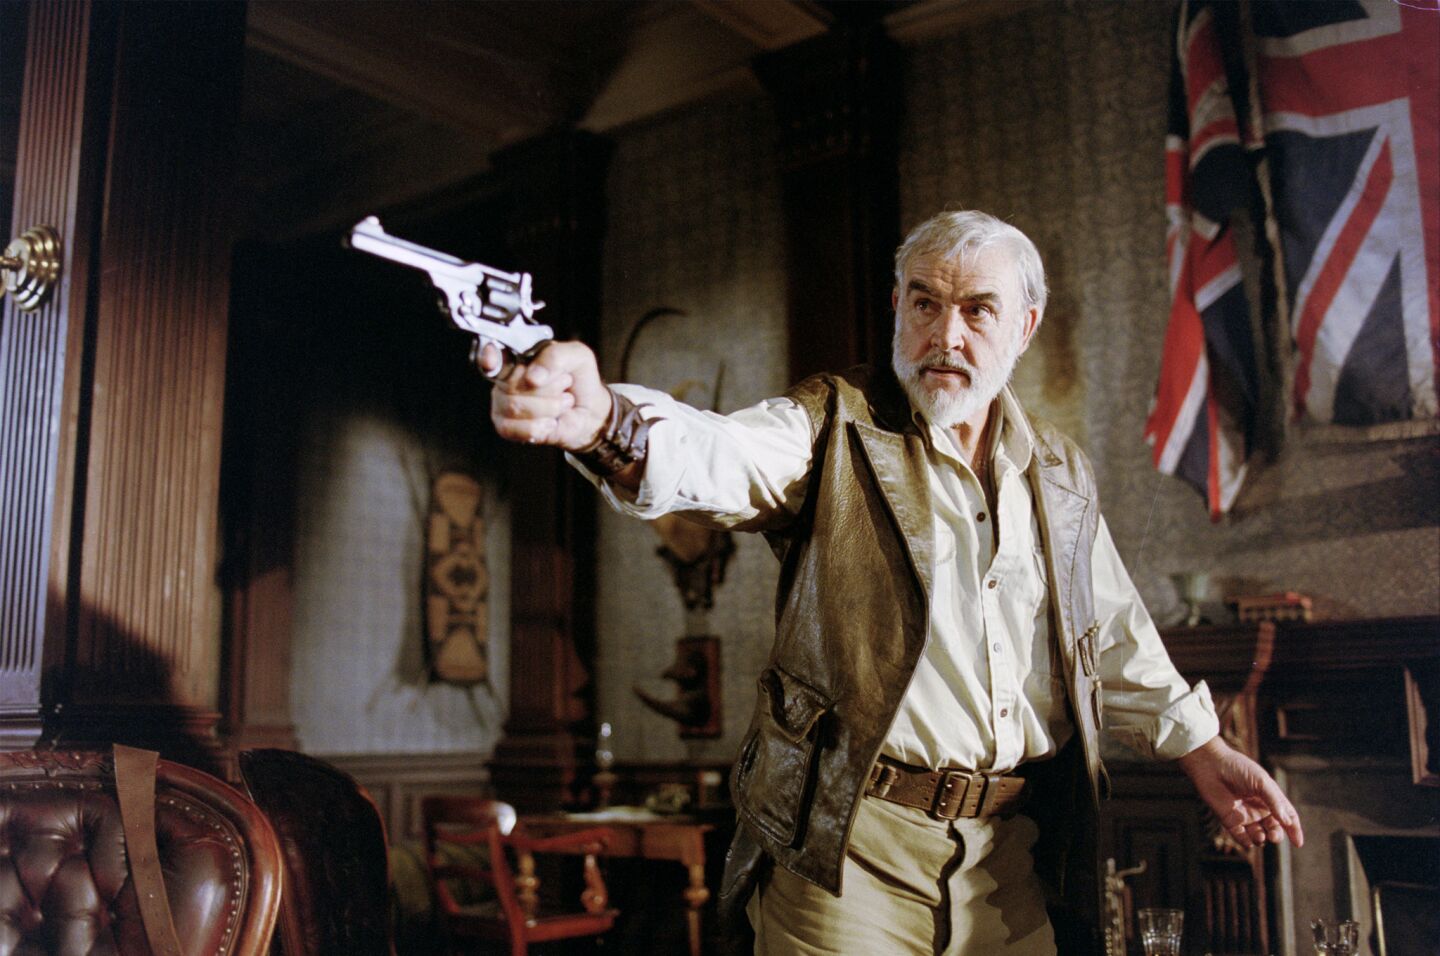 Connery stars as Allan Quatermain in the 2003 movie "The League of Extraordinary Gentlemen," his final starring role.